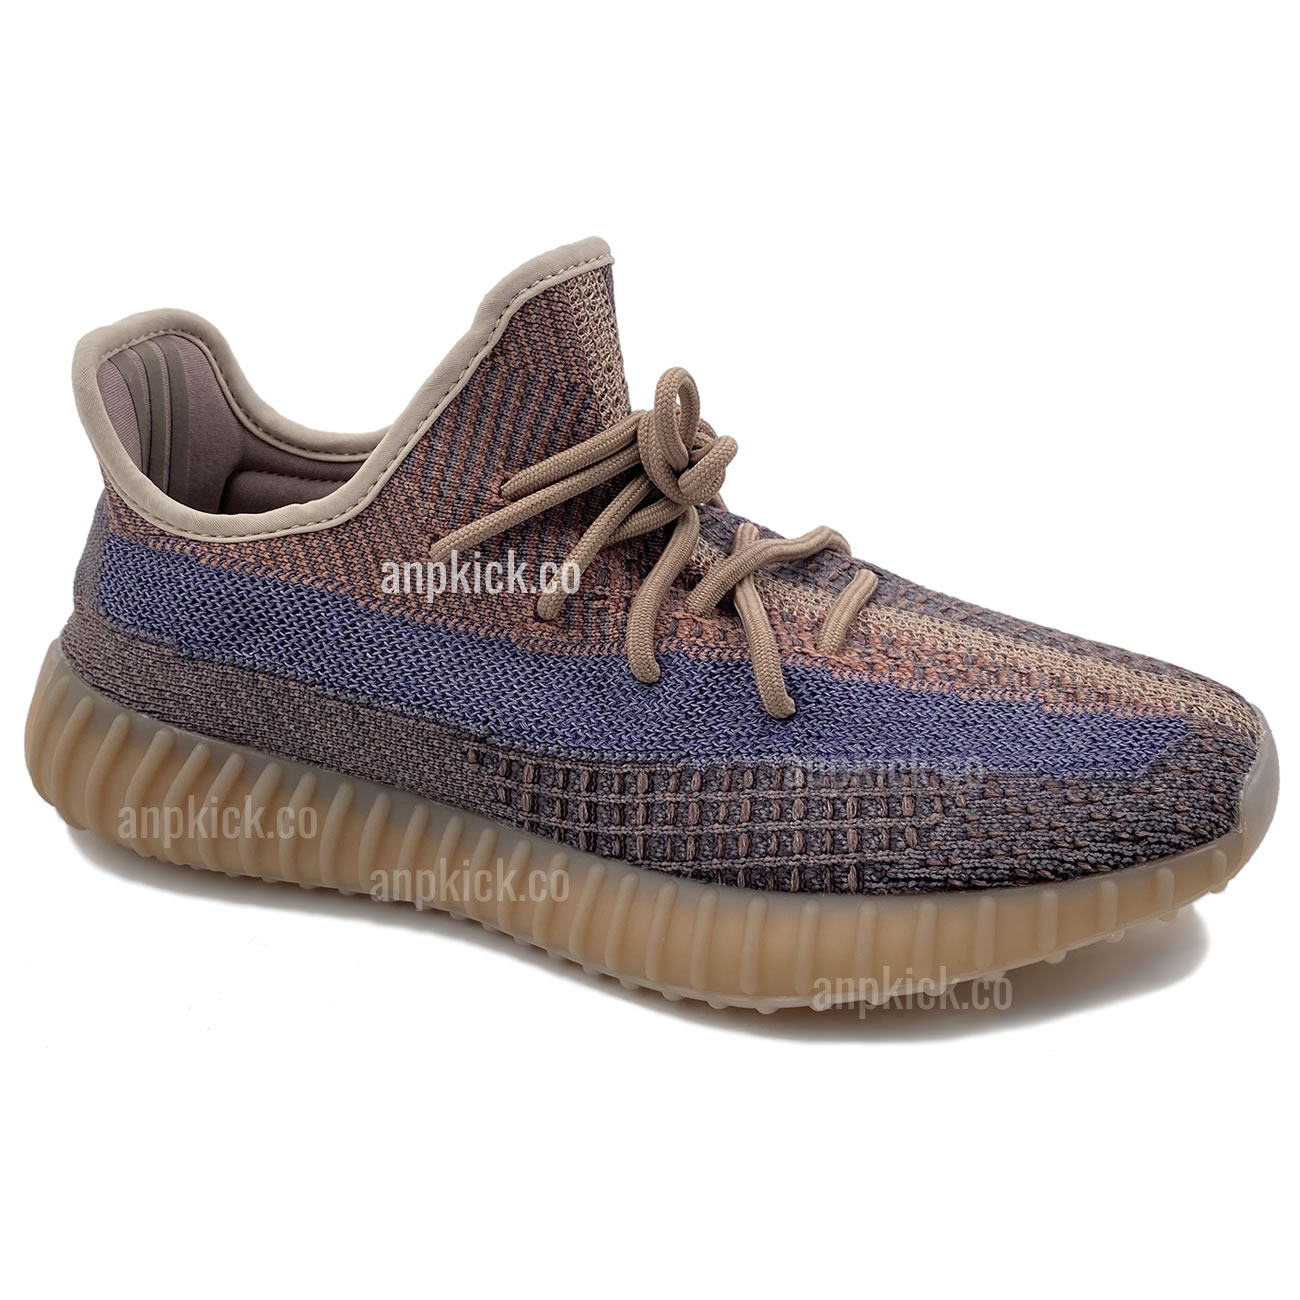 Adidas Yeezy Boost 350 V2 Yecher Ho2795 New Release Date First Look (4) - www.newkick.org